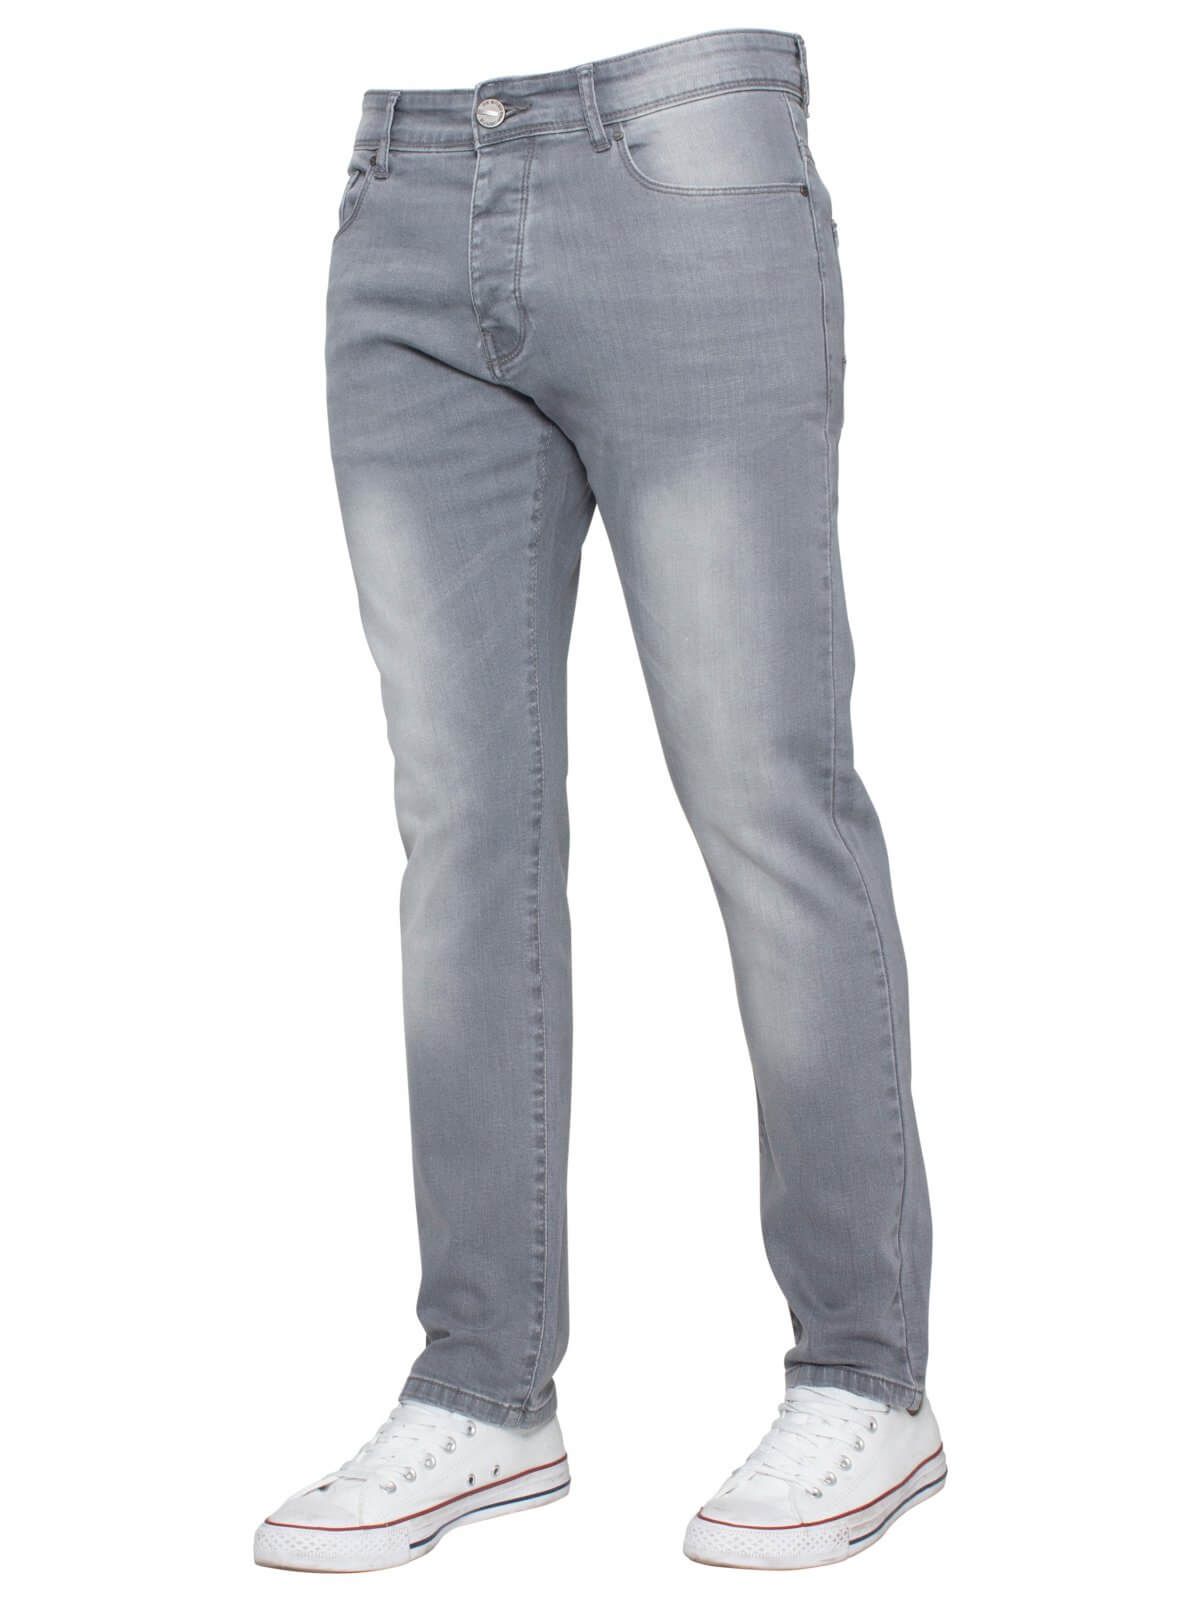 Update your blue denim collection with these skinny fit men s designer jeans by Enzo, tailored in soft cotton blend with a hint of stretch that combines a streamlined silhouette with comfort and freedom of movement. This button fly style features 5 pockets, a coin pocket, a branded PU waist tag and branded rivets and buttons. With a wide range of sizes up to waist 42 at the fashion website, everyone can find the perfect pair.